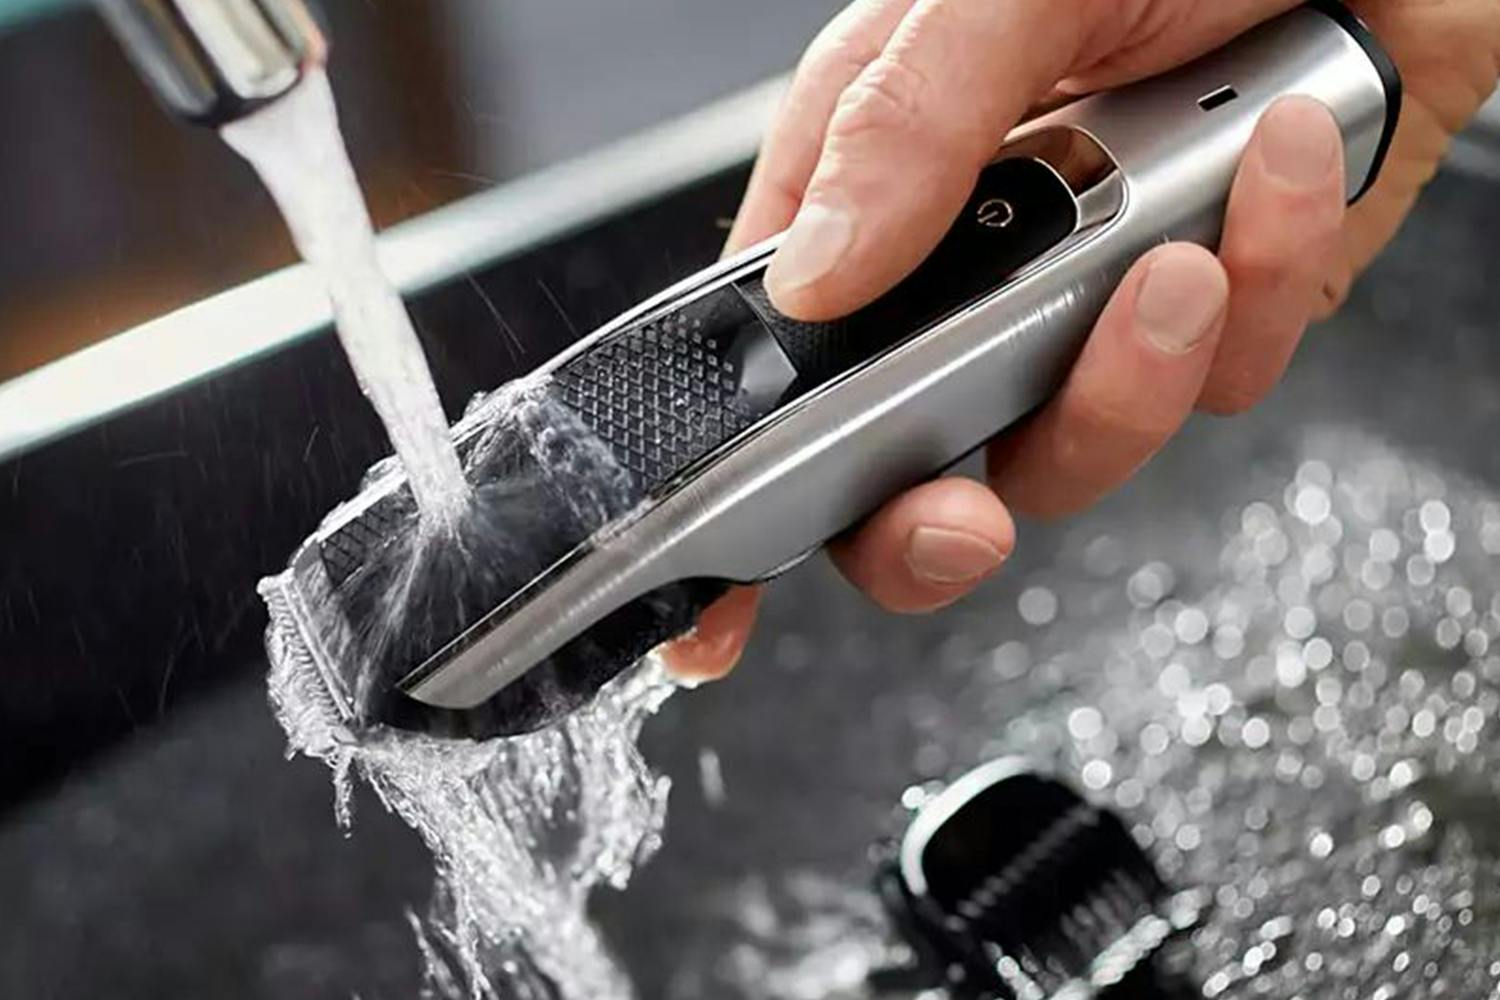 Automatic Electric Nail Clippers – Bravo Goods